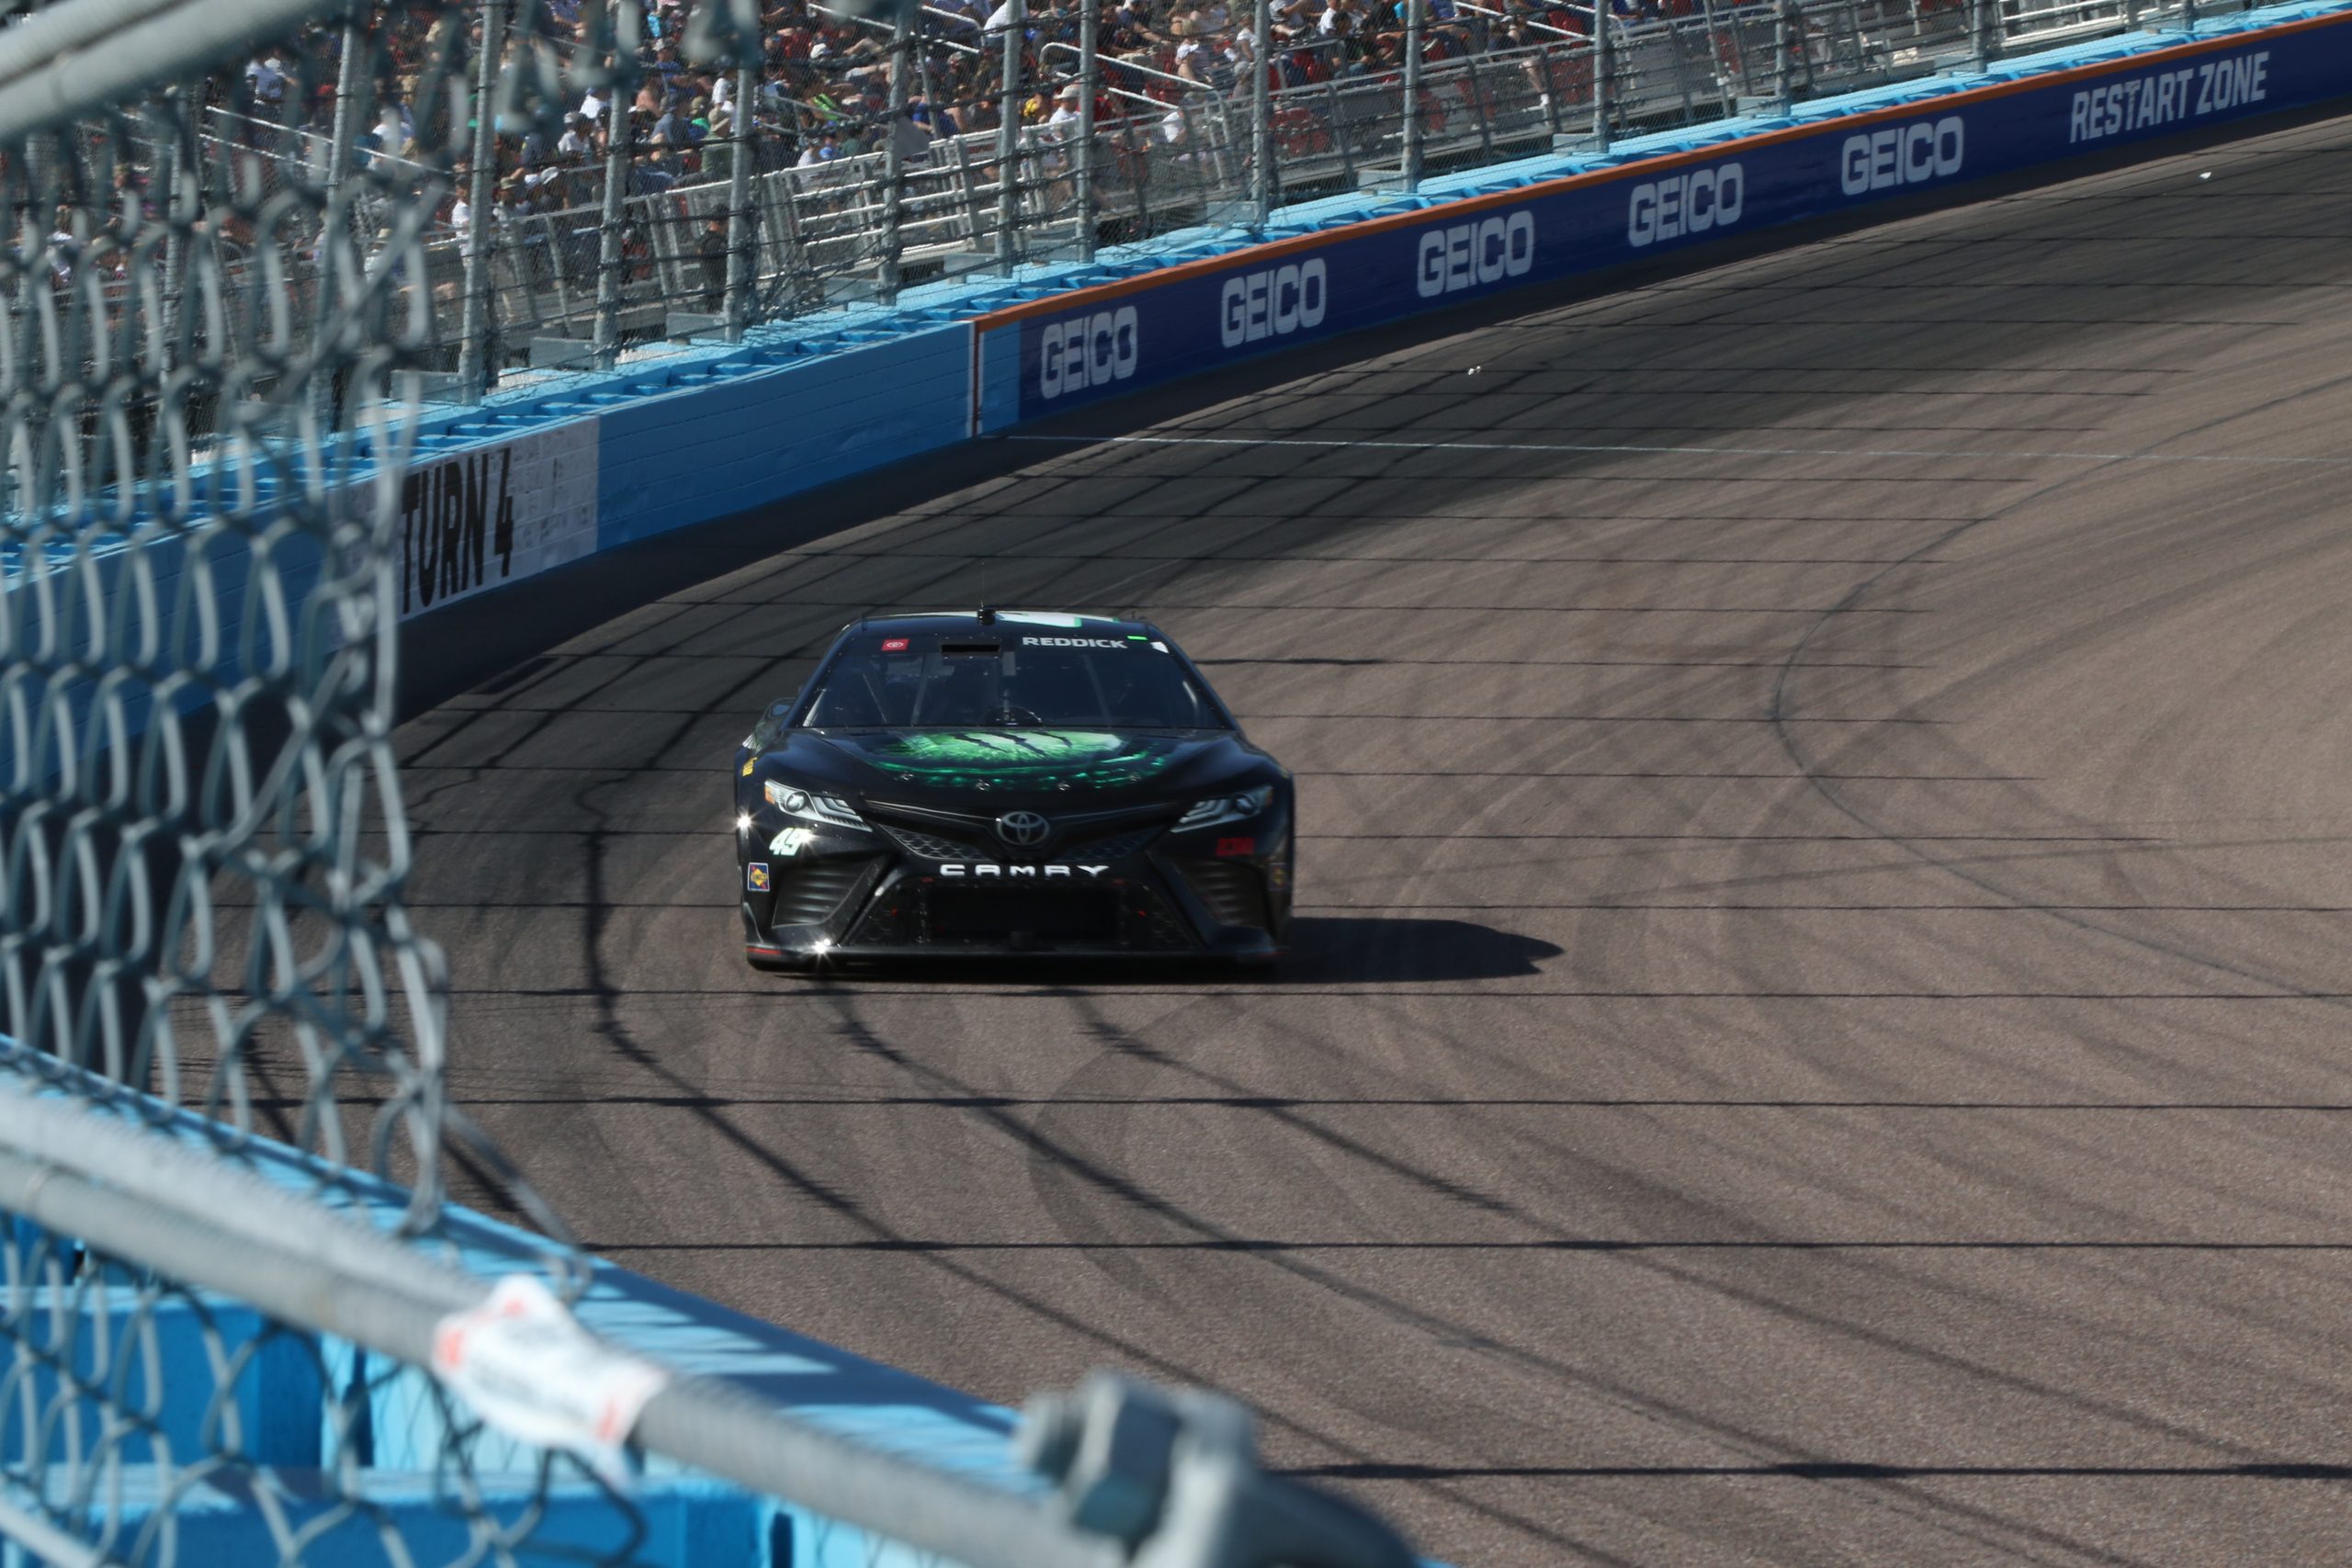 After some Monday morning quarterbacking, Reddick will be ready for the next Cup race at Atlanta. (Photo: Christopher Vargas | The Podium Finish)